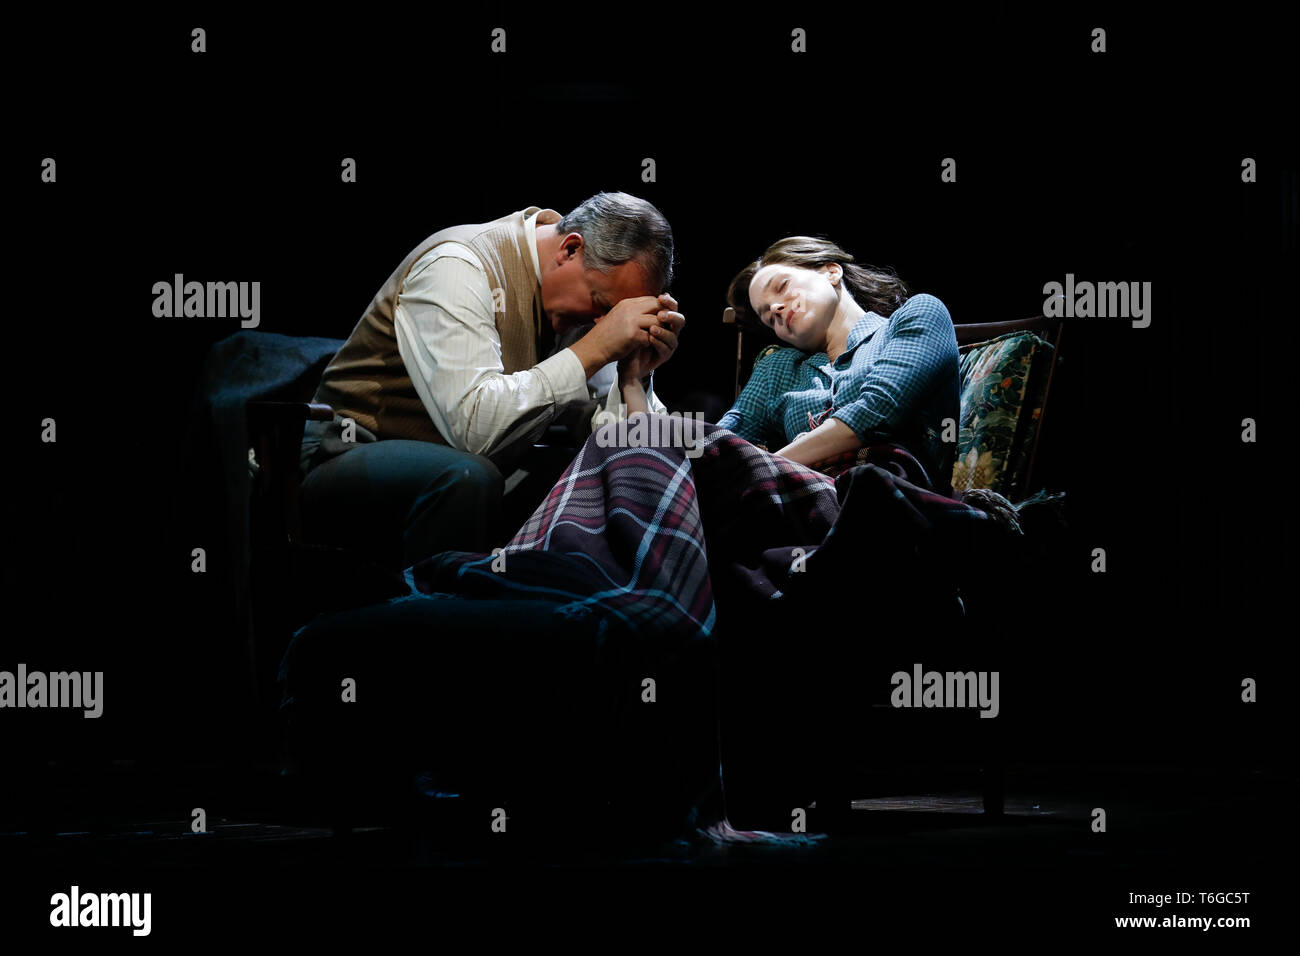 Chichester, UK. 1st May 2019. Hugh Bonneville (L) performs as C.S. Lewis, with Liz White (as Joy Gresham) during a photocall for William Nicholson's 'Shadowlands' at the Chichester Festival Theatre in West Sussex, UK Wednesday May, 1, 2019. The play, directed by Rachel Kavanaugh, runs until May 25. Photograph : Credit: Luke MacGregor/Alamy Live News Stock Photo